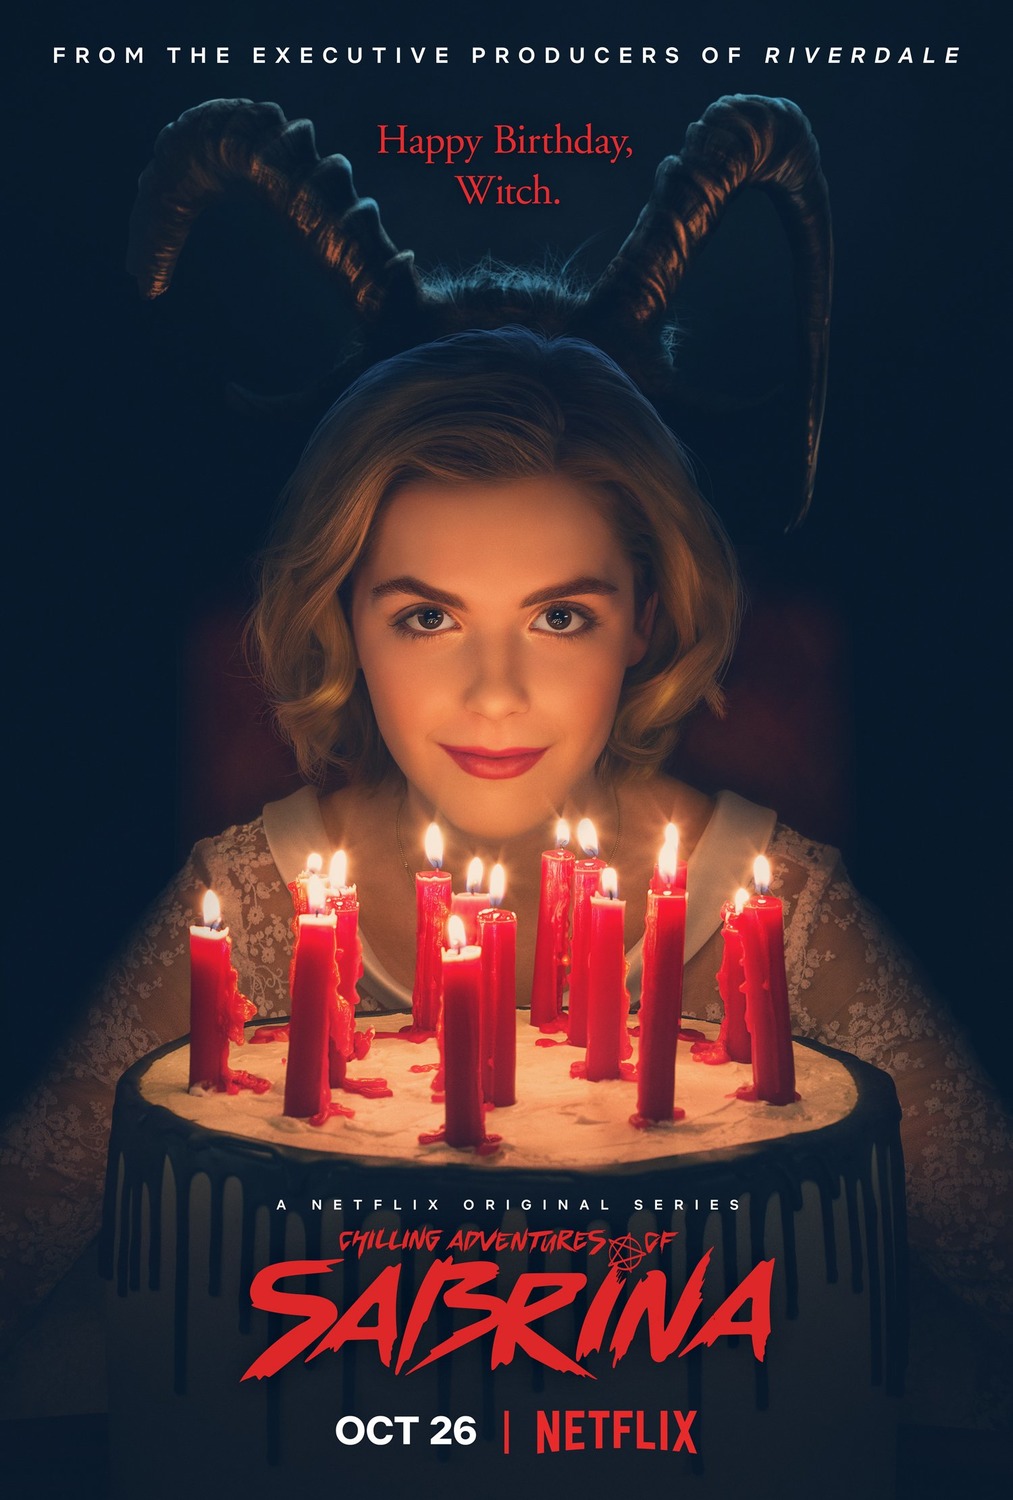 Extra Large TV Poster Image for Chilling Adventures of Sabrina (#2 of 8)